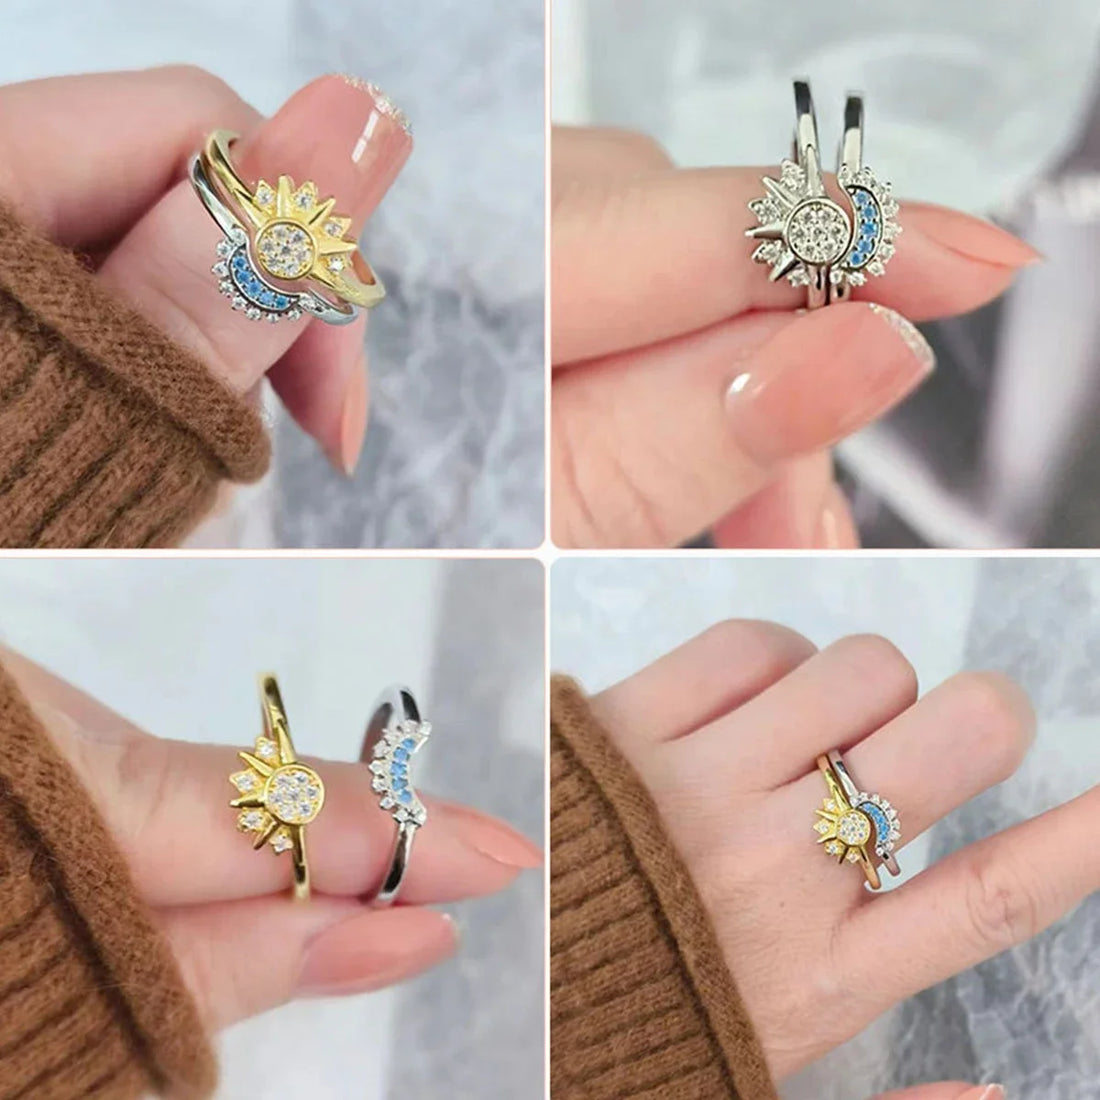 2023 New Summer Women Fashion Sun Moon Star Ring Elegant Temperament Sparkling Finger Ring Party Jewelry Accessories Gift